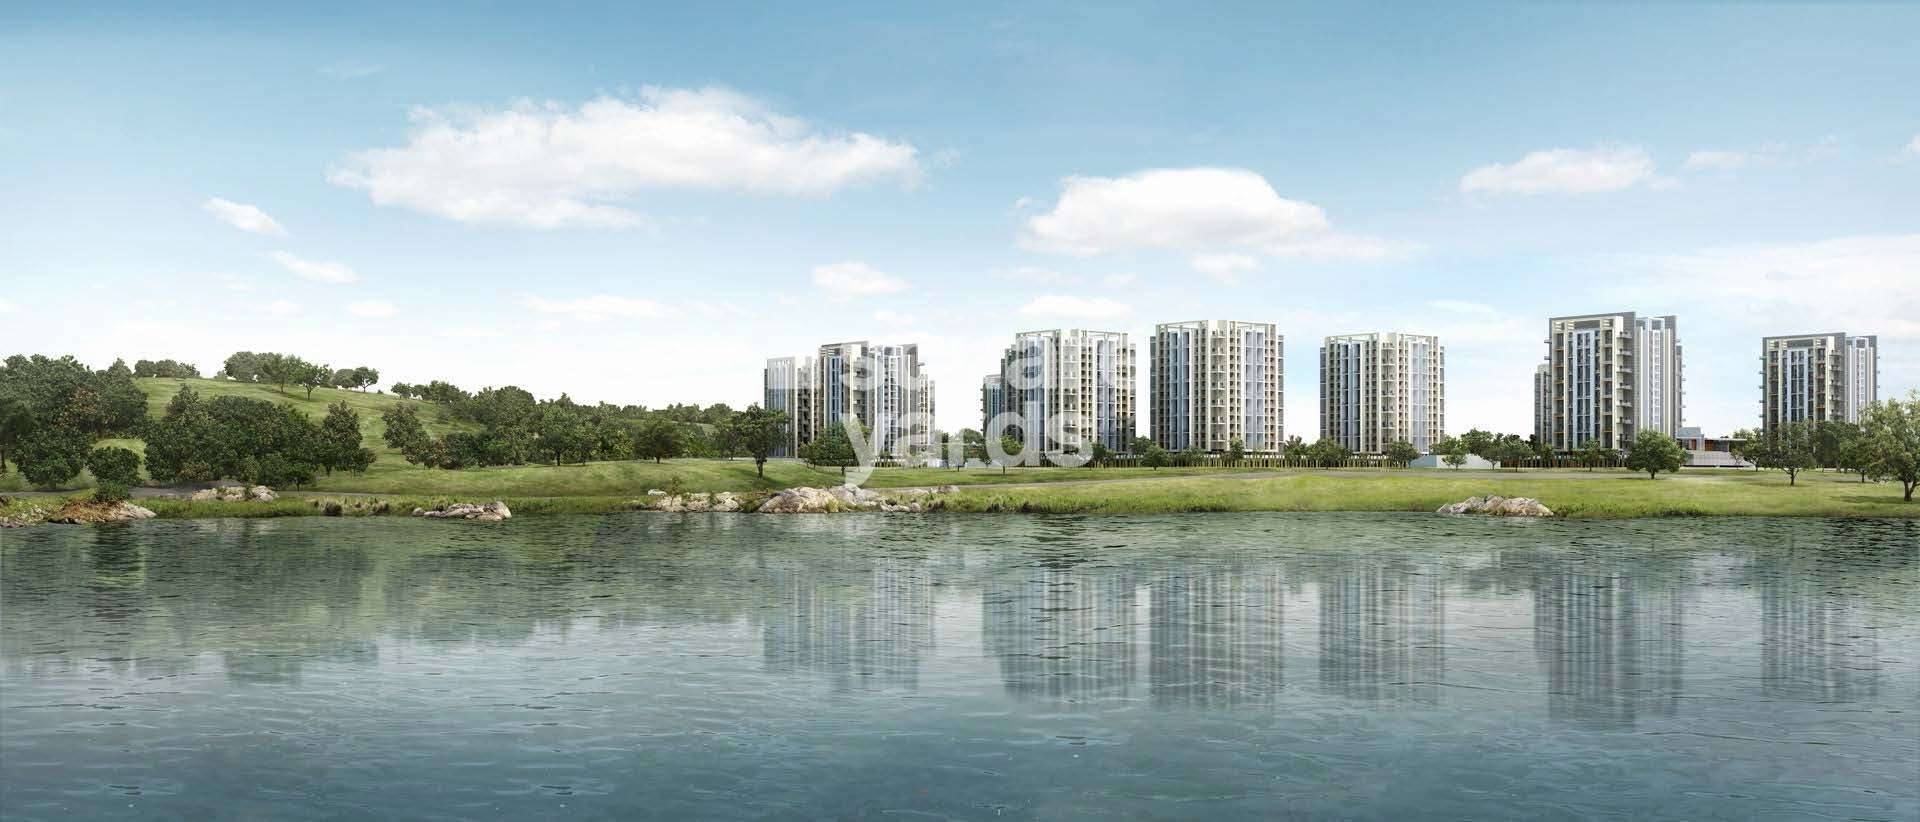 skyi manas lake project tower view6 2197